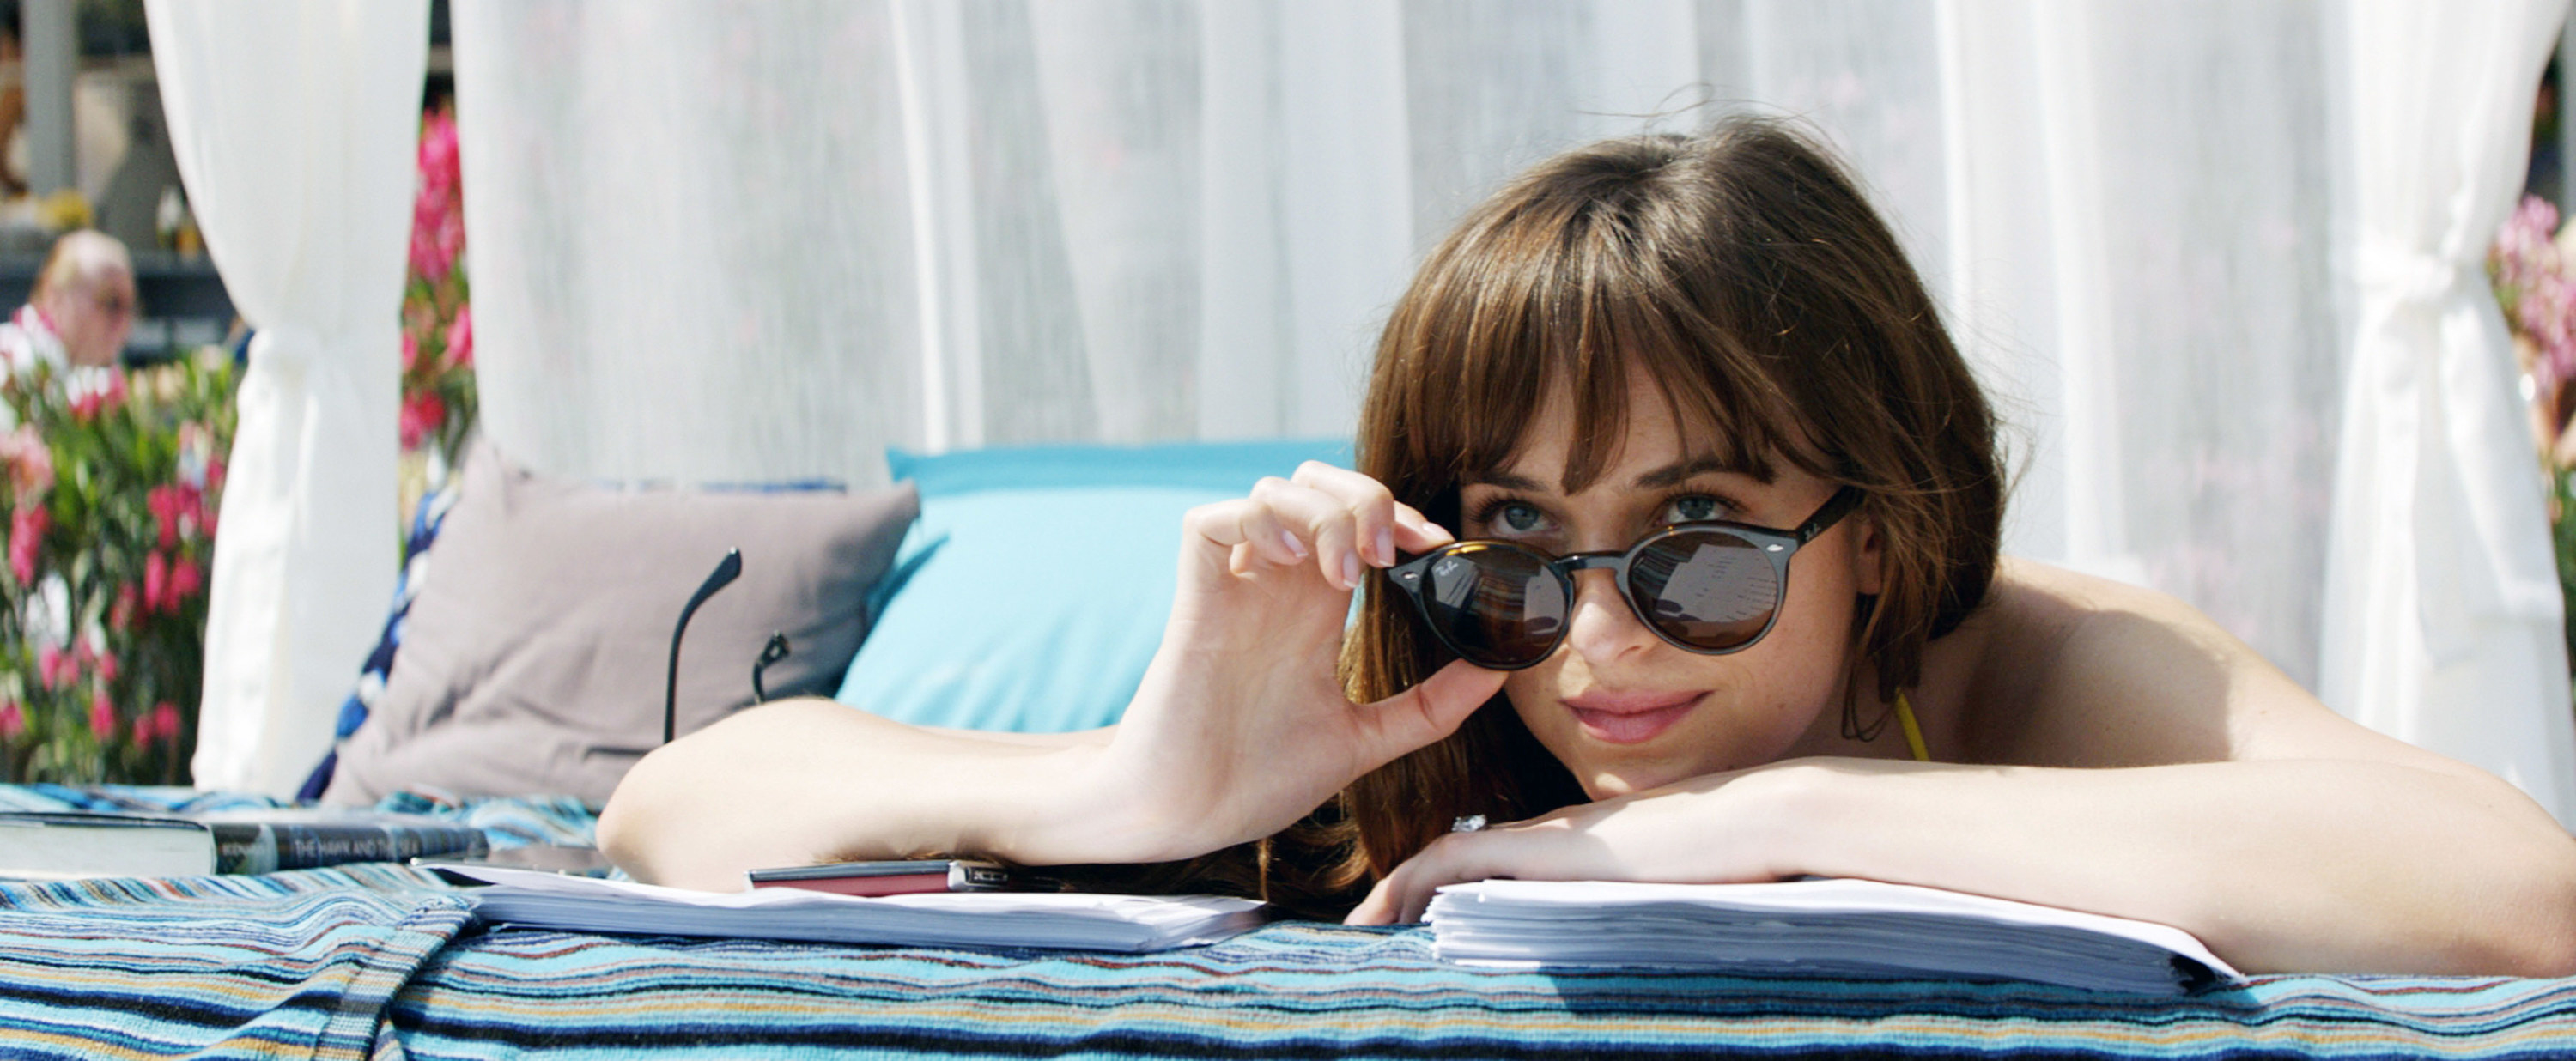 Dakota looks over her sunglasses at something as she lays on her stomach as she lounges by the pool